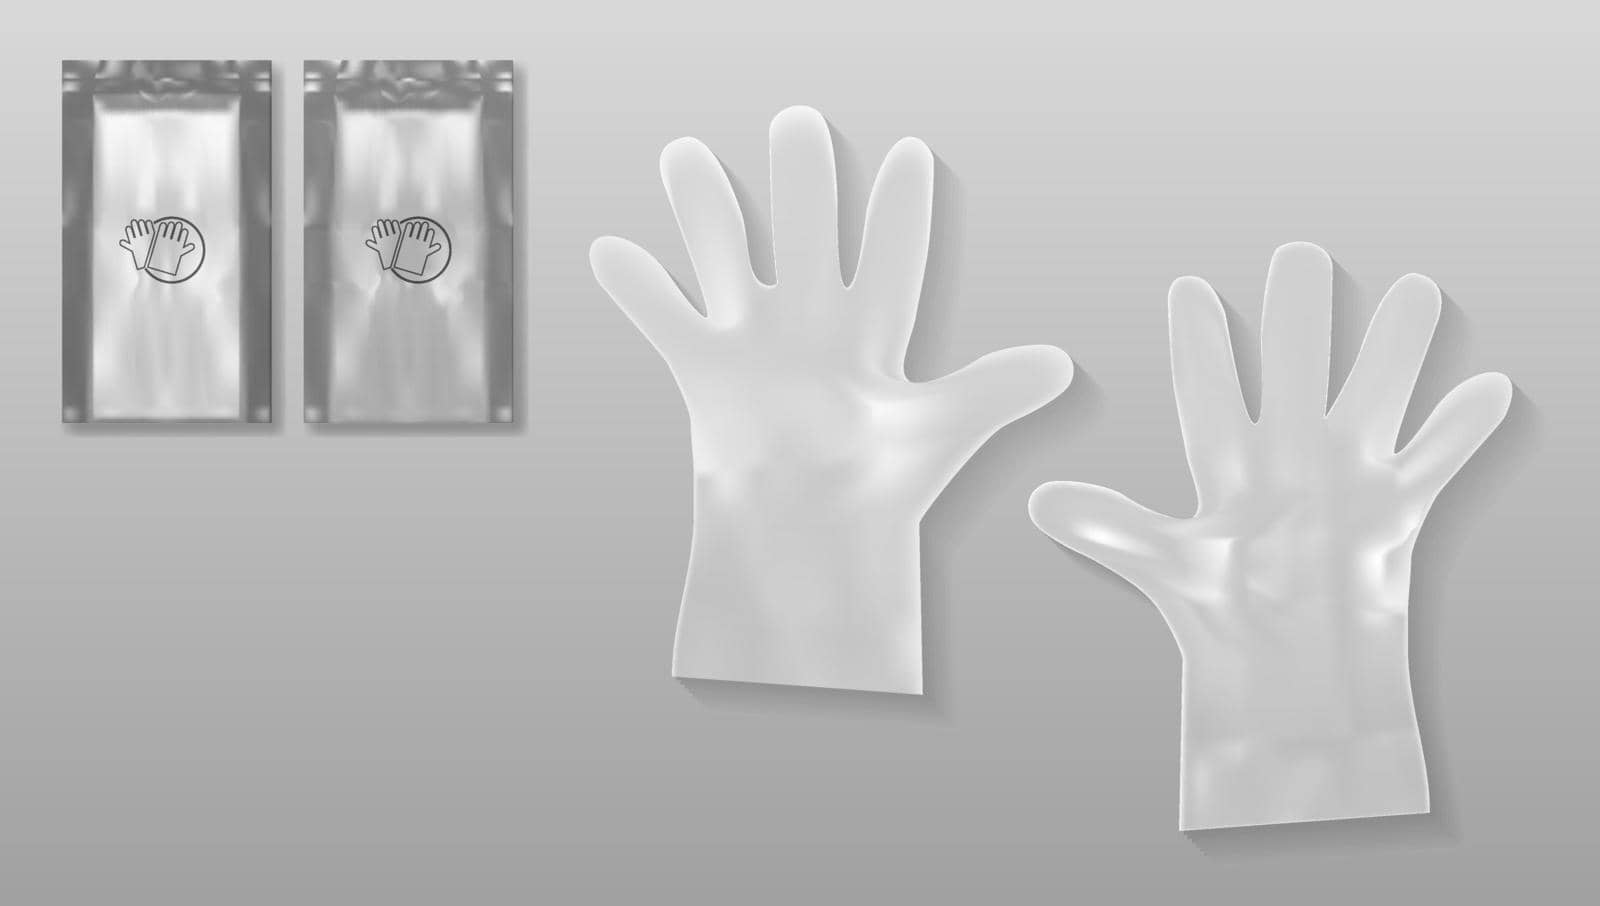 Disposable Transparent Plastic Gloves With Packing For Medical Use Or Cosmetics Purpose. EPS10 Vector